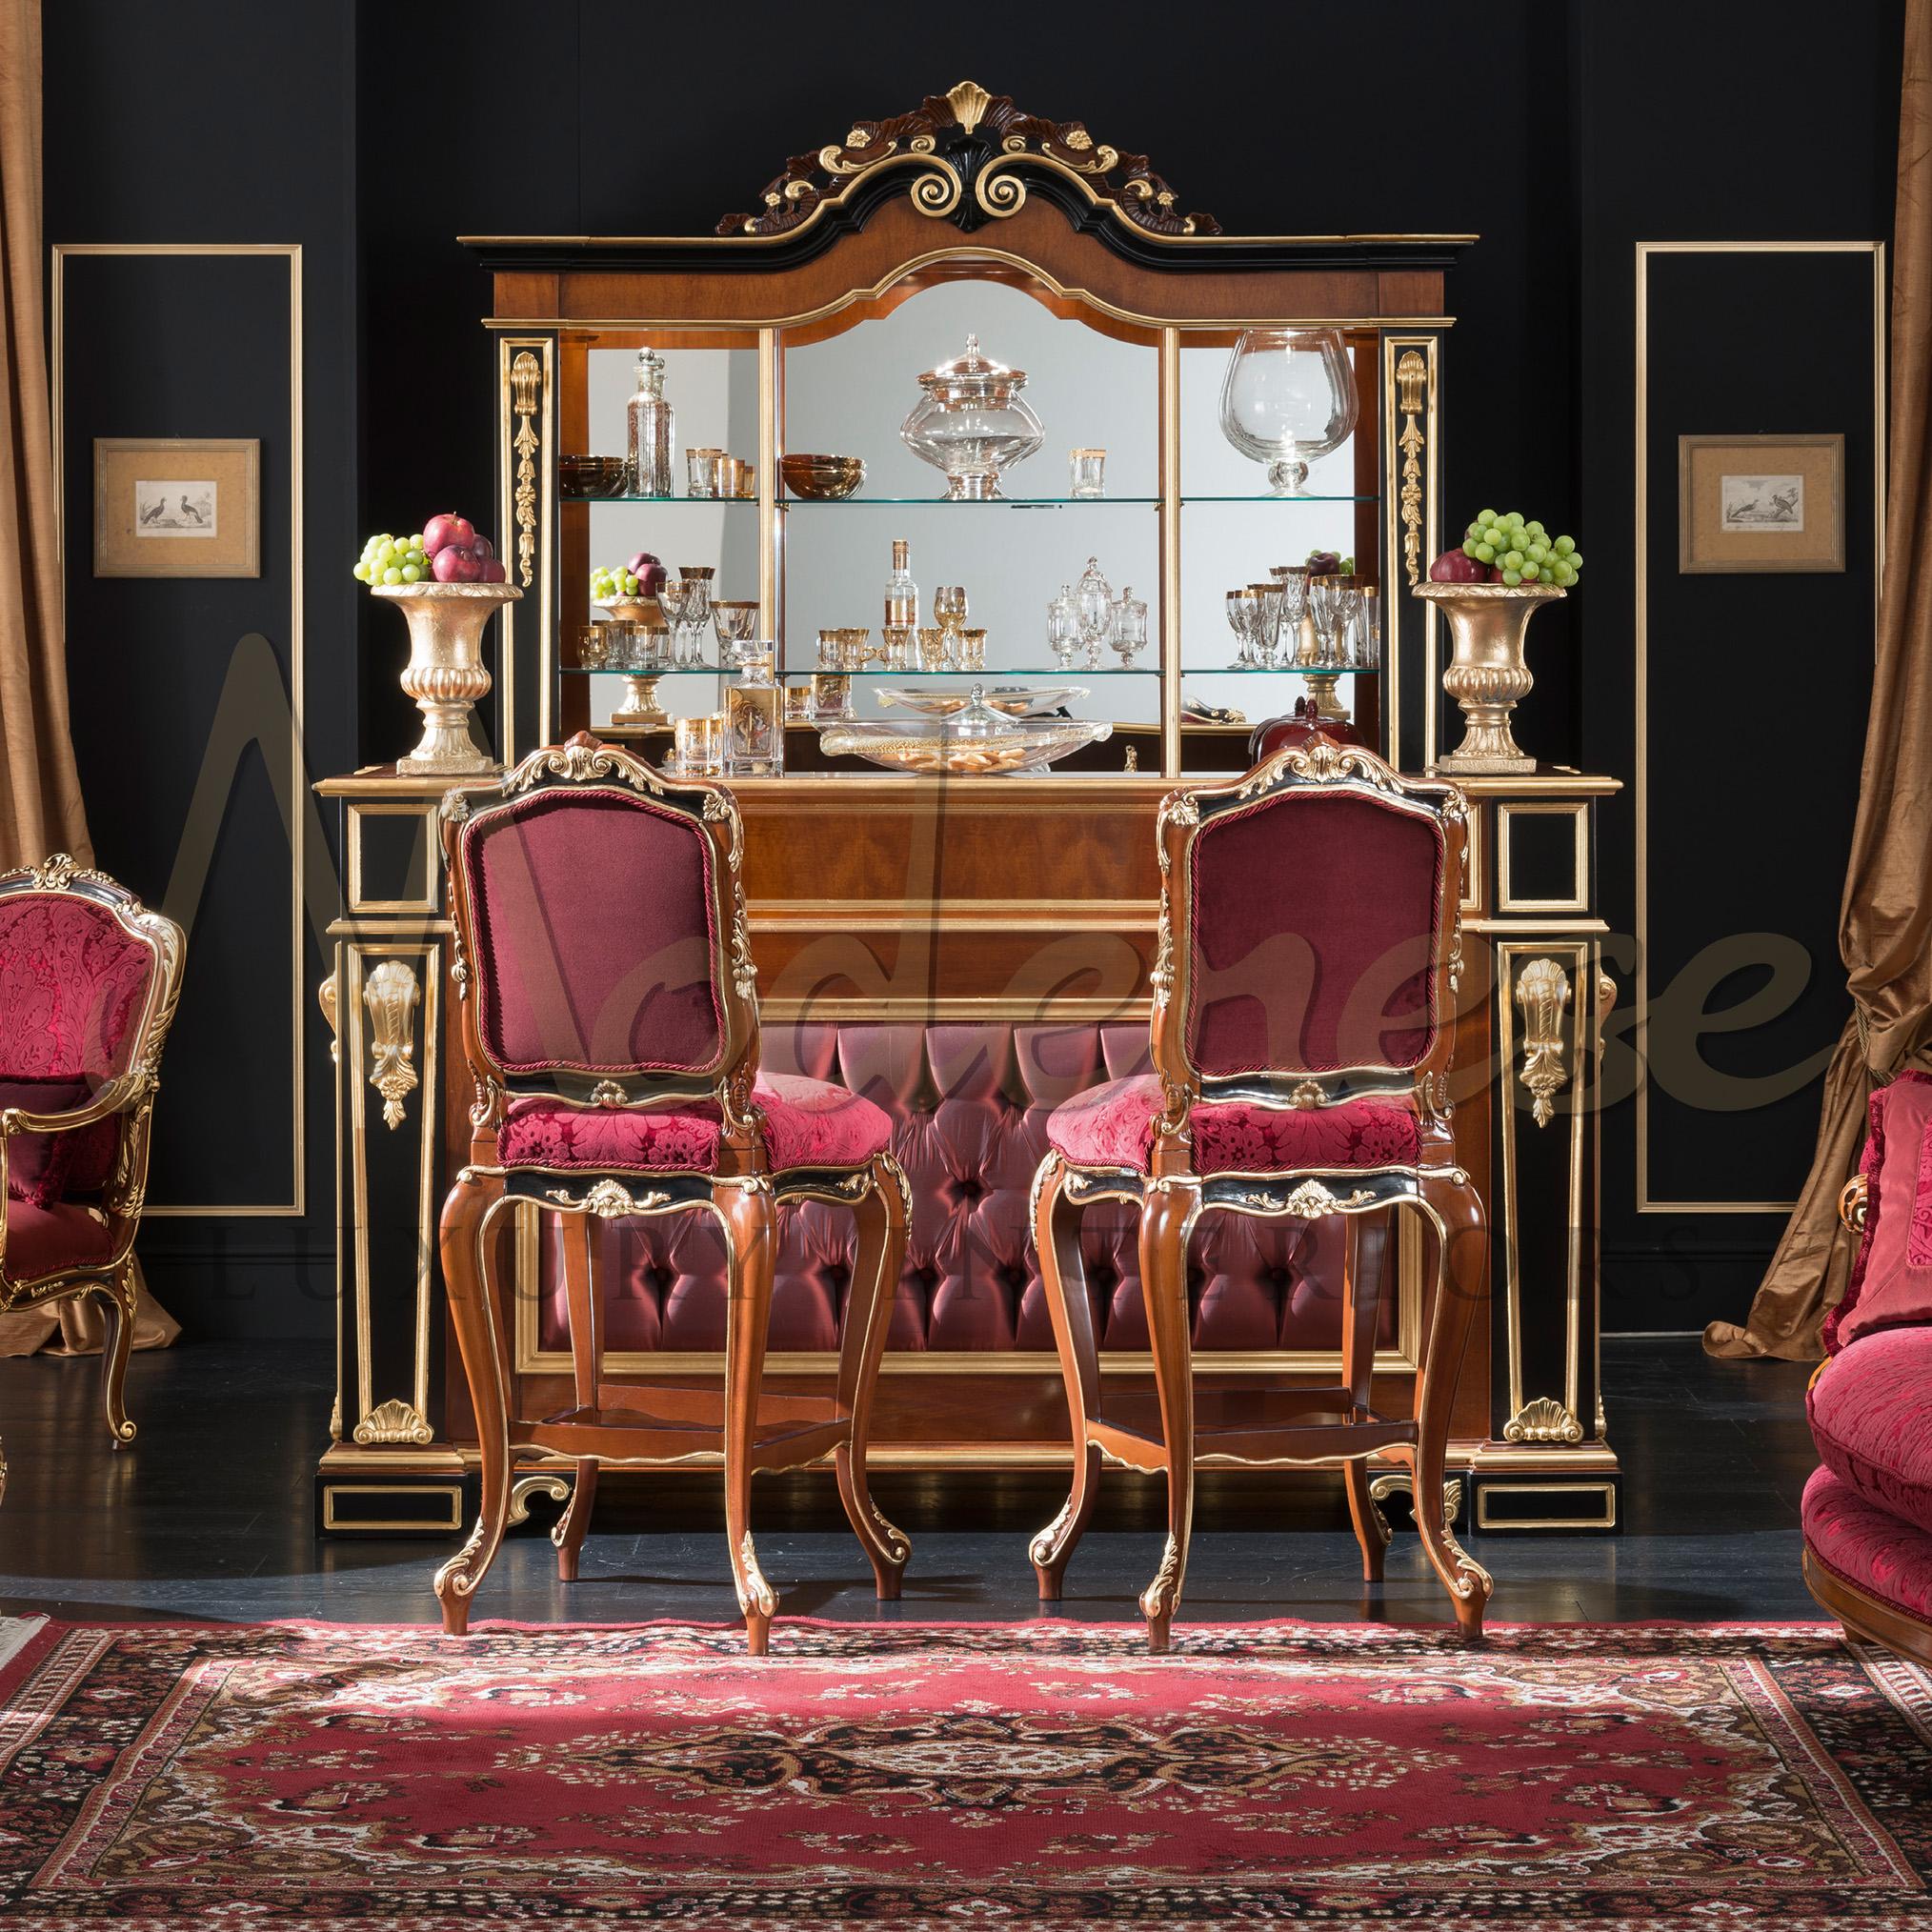 Live the real Made in Italy luxury life style with this cozy red bar counter. Solid baroque wooden structure, radica veneers, black lacquered finish with hand decorated gold leaf details and a real leather upholstered front. Modenese Interiors can